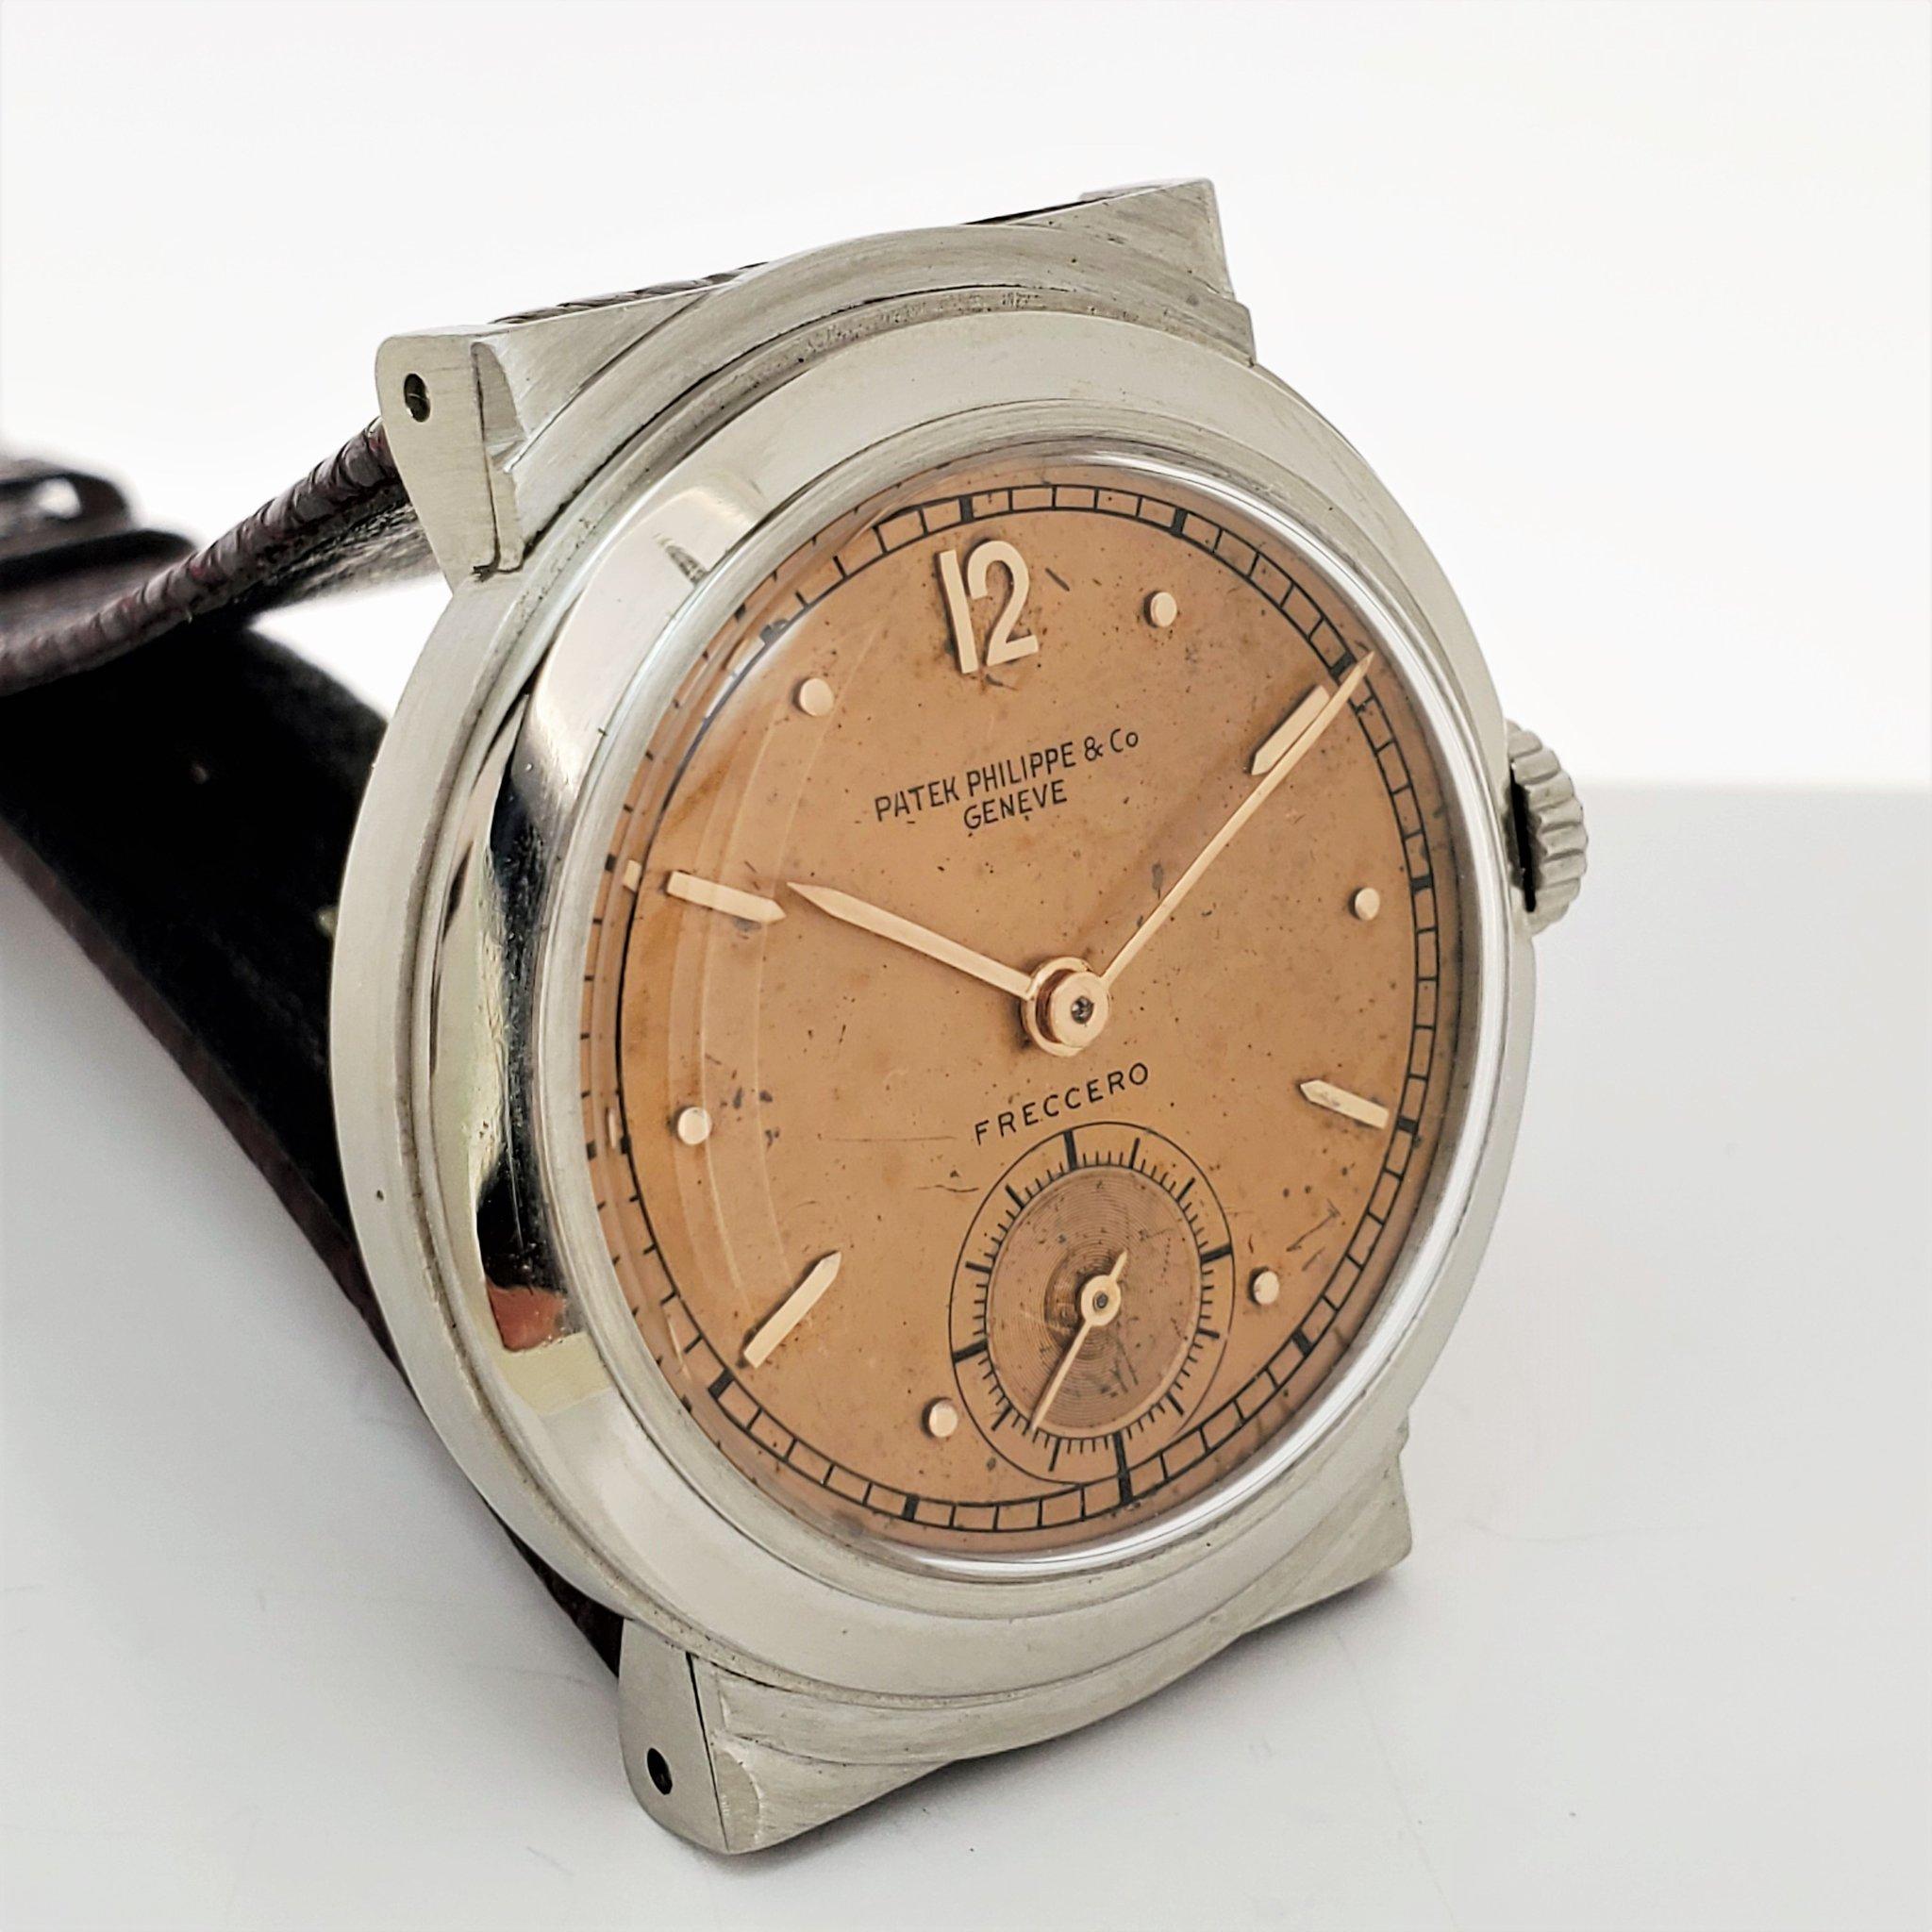 Patek Philippe 544A Stainless Steel Hooded Calatrava Watch For Sale 2